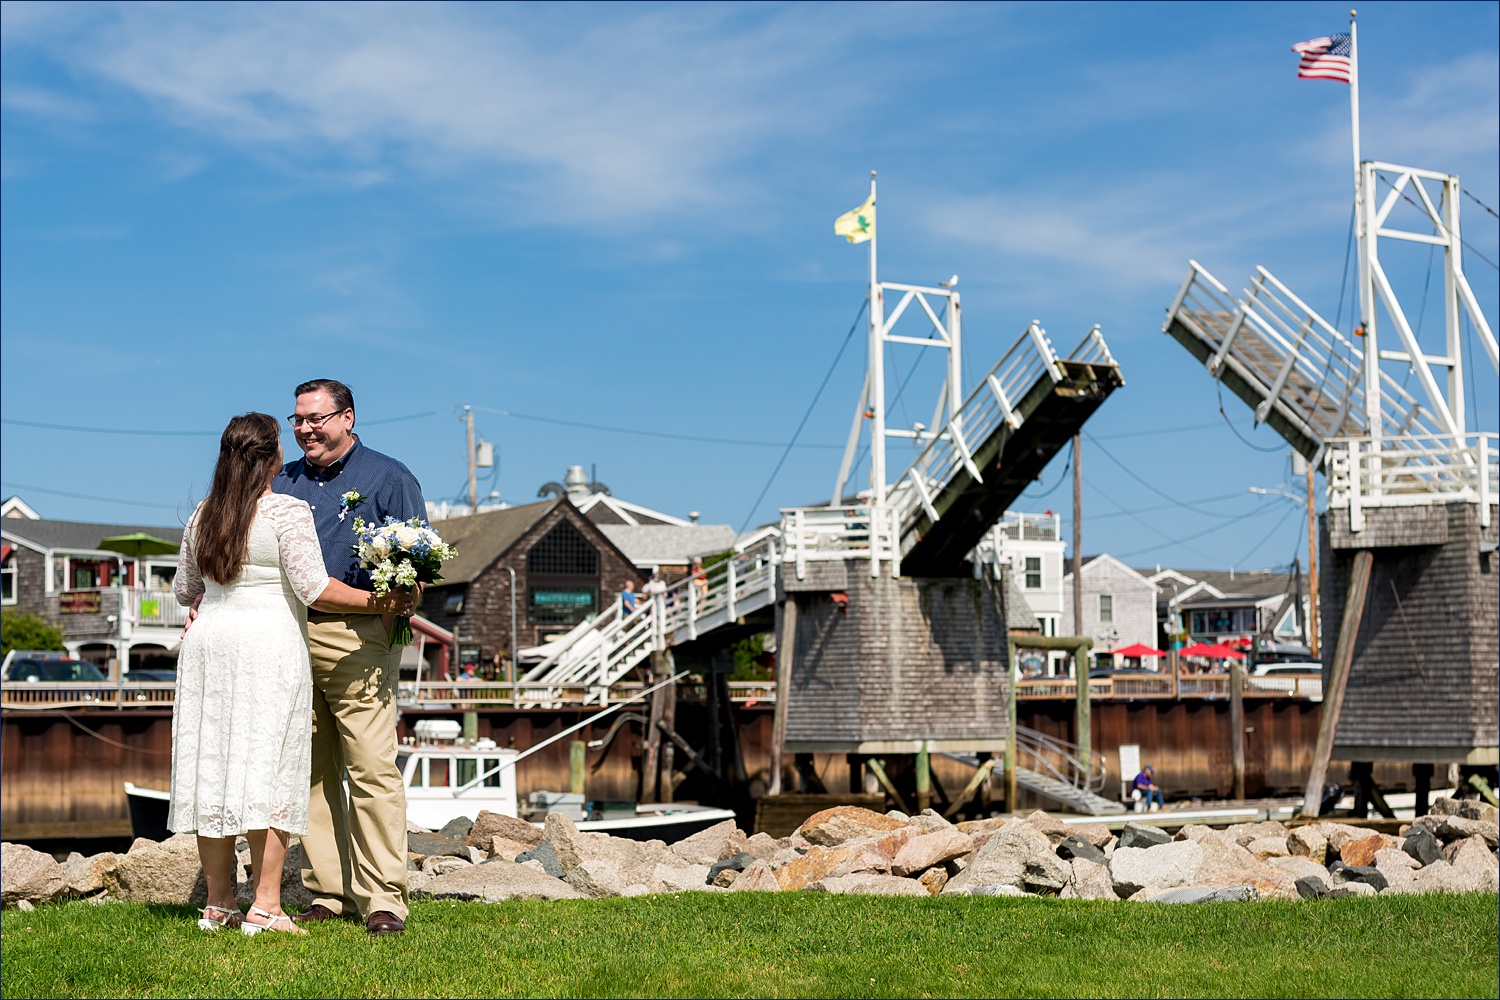 The couple at Perkin's Cove in Ogunquit Maine